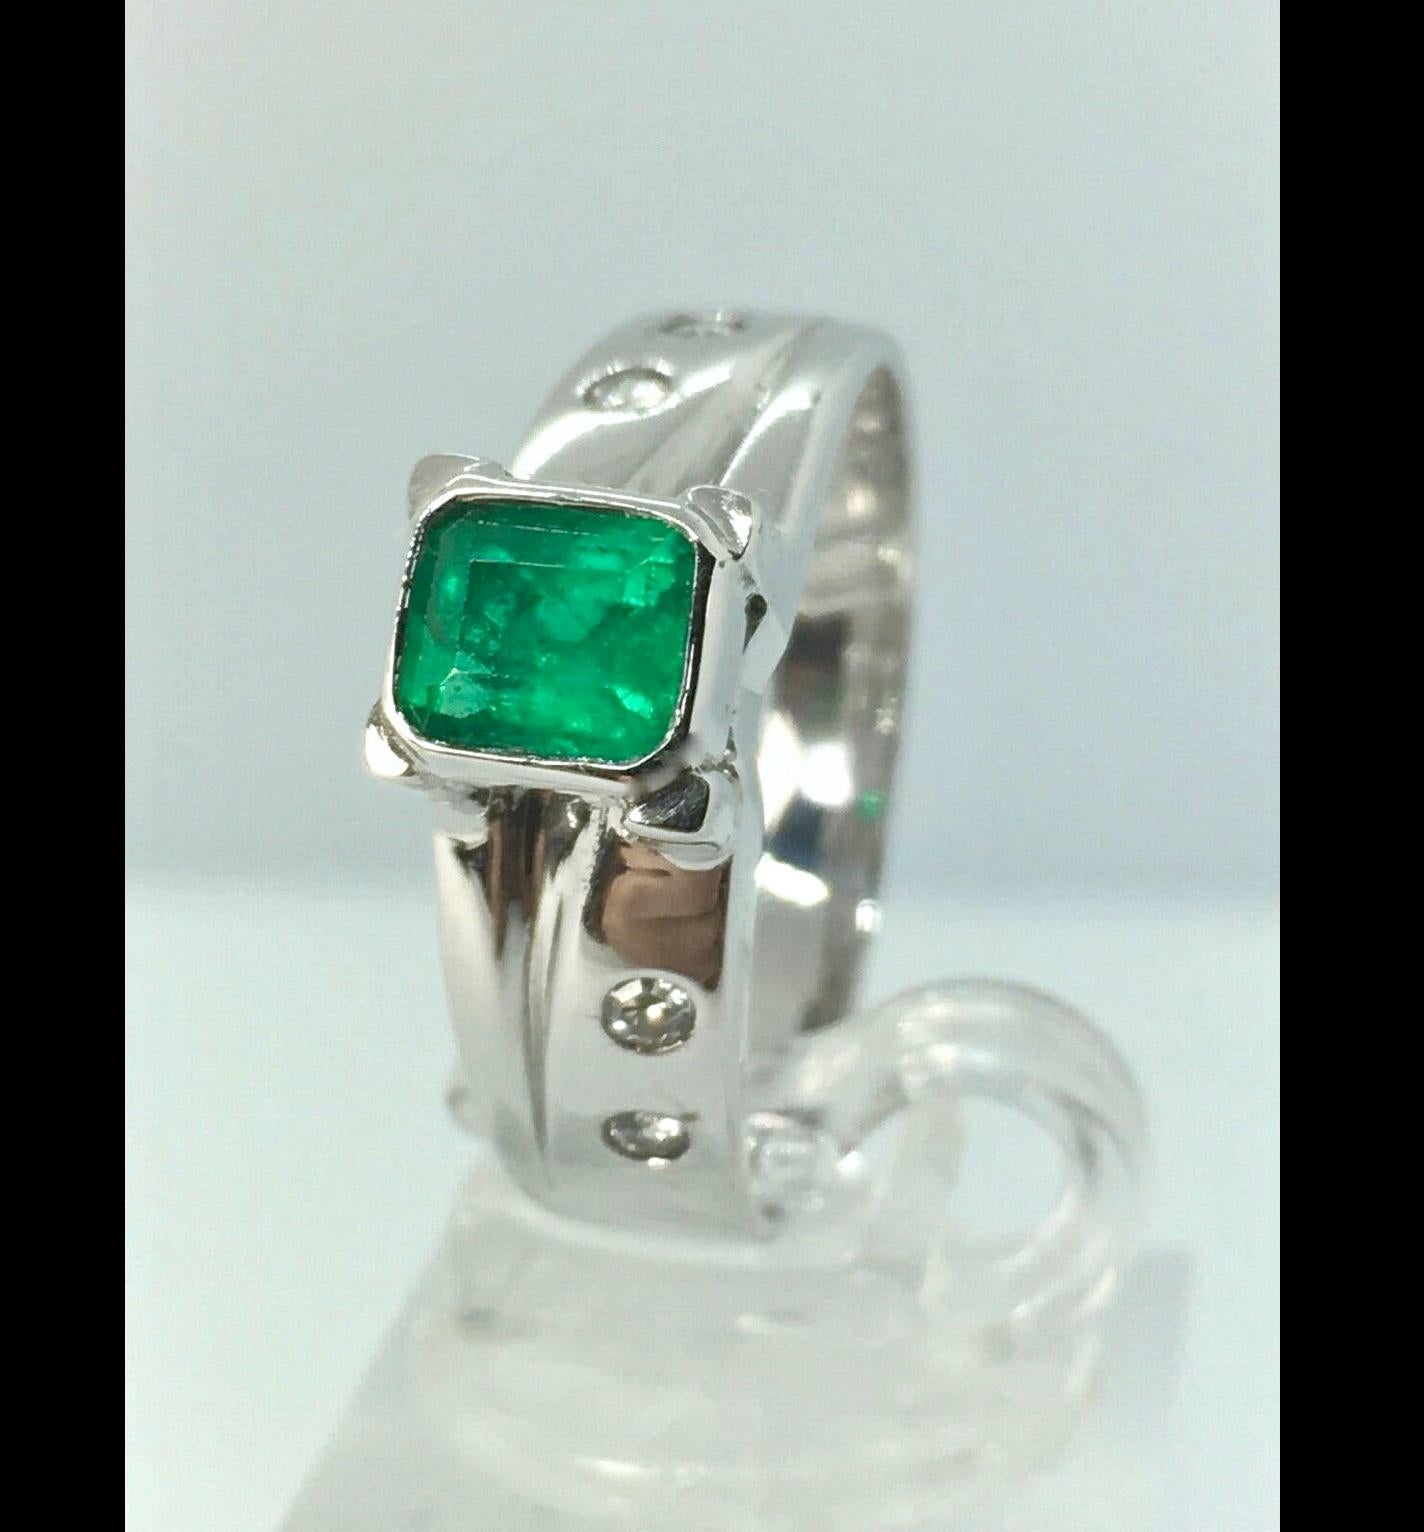 Emerald and Diamonds  Ring
Mounting Is Custom Made of Solid 18K W.G
 
Center
Natural Colombian Emerald 
1.00 carat
Vivid Medium Green
Side
Diamonds
0.20 Cts
Clarity  VS1
Color F/G
Weight   5.15g
Ring Size 8.5